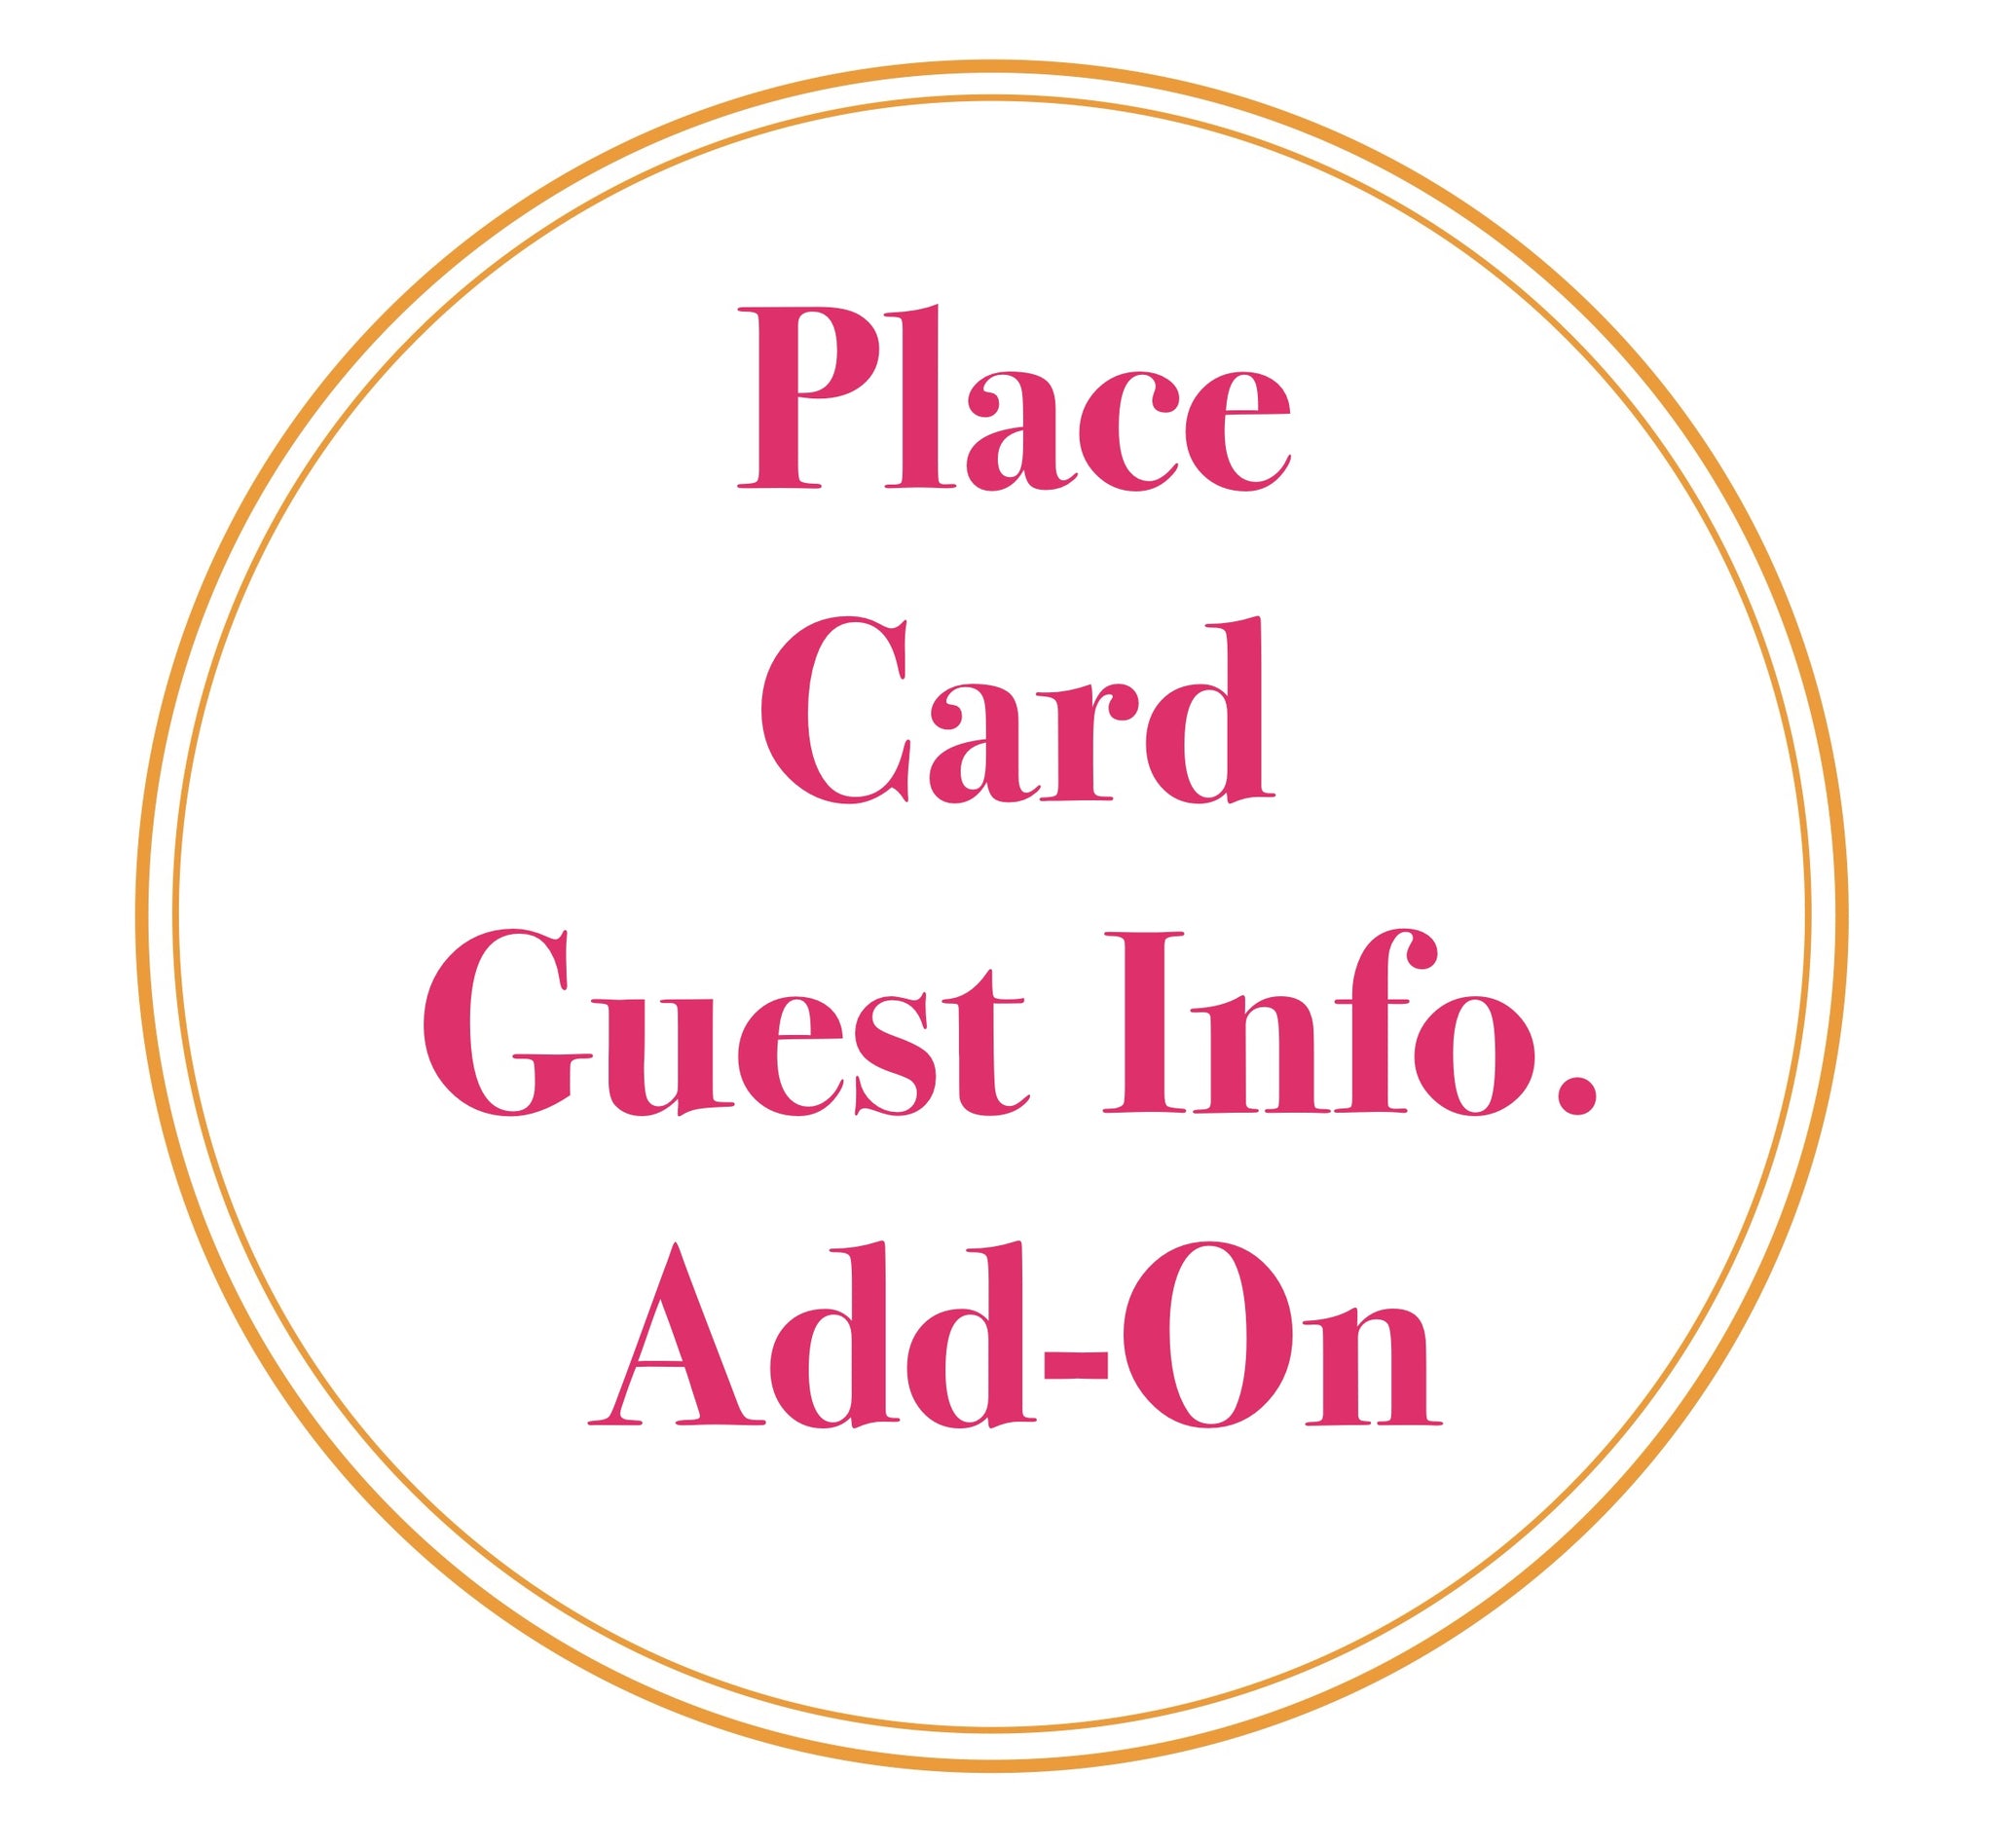 Place Card Guest Information Add-On